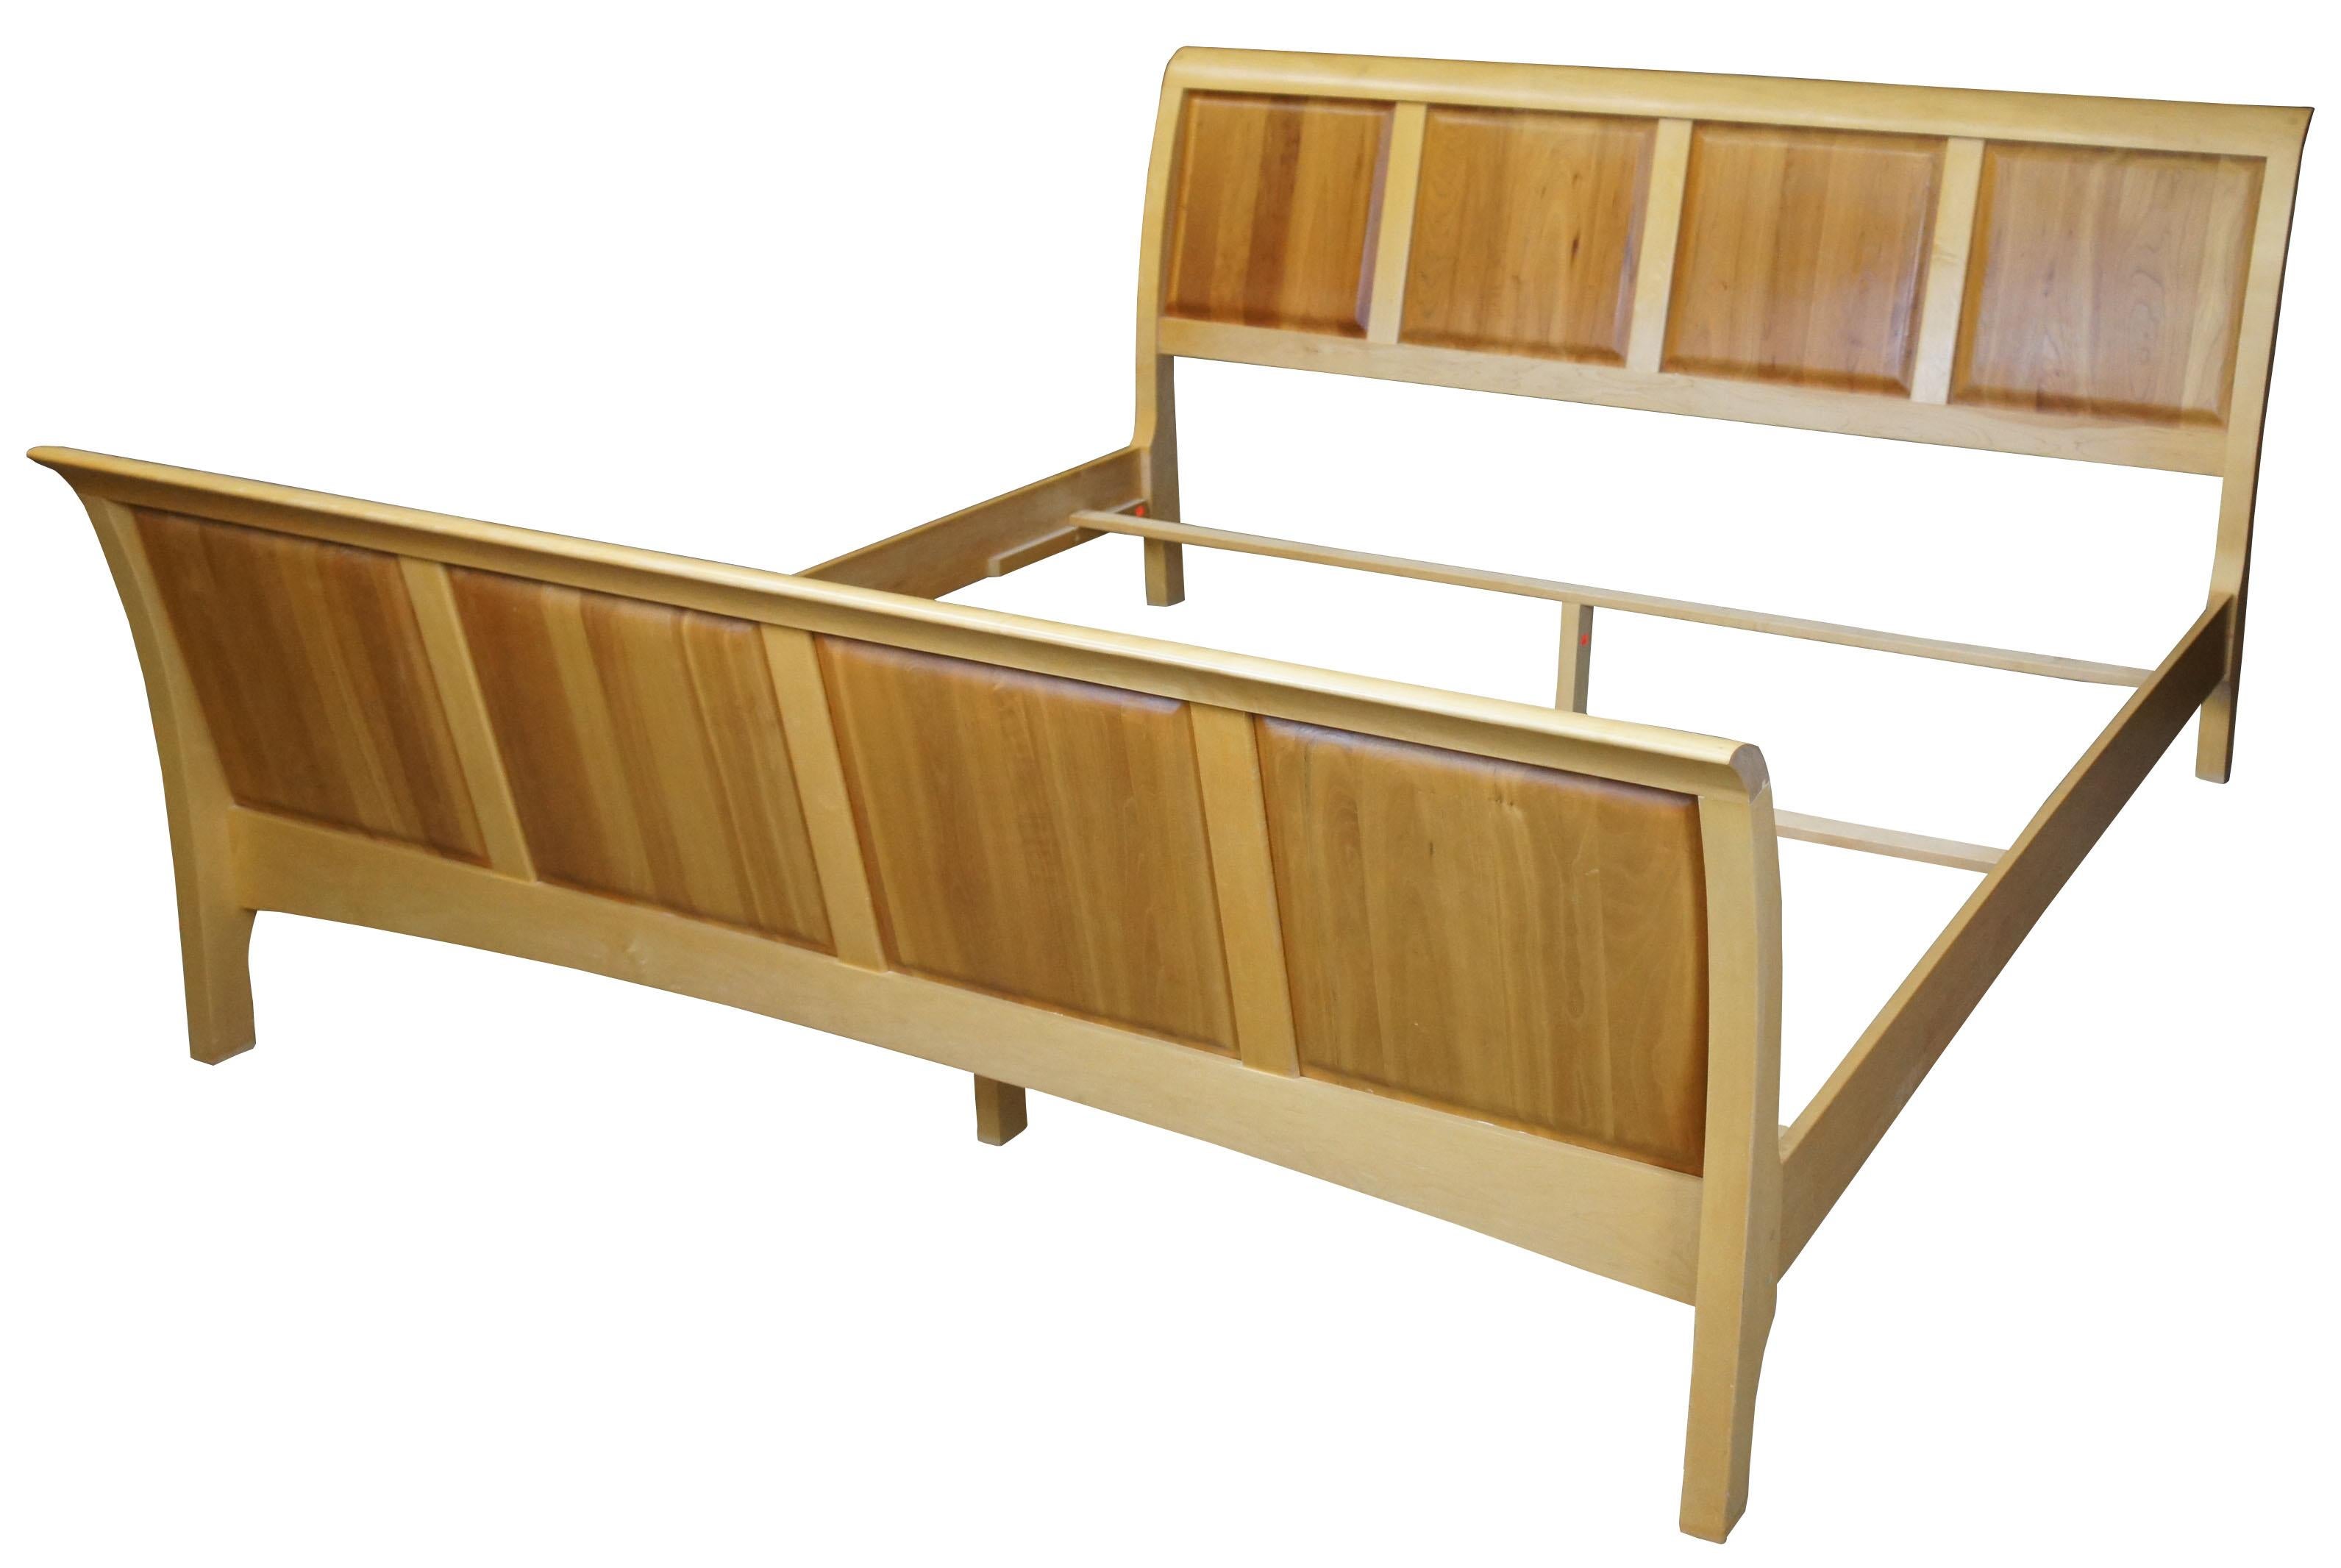 Copeland Furniture Sarah Maple & Cherry King sleigh bed Shaker style

Sarah King Sleigh bed by Copeland Furniture
Maple & Cherry

The Sarah bedroom exhibits the clean lines and balanced proportions of its Shaker influence.

Product